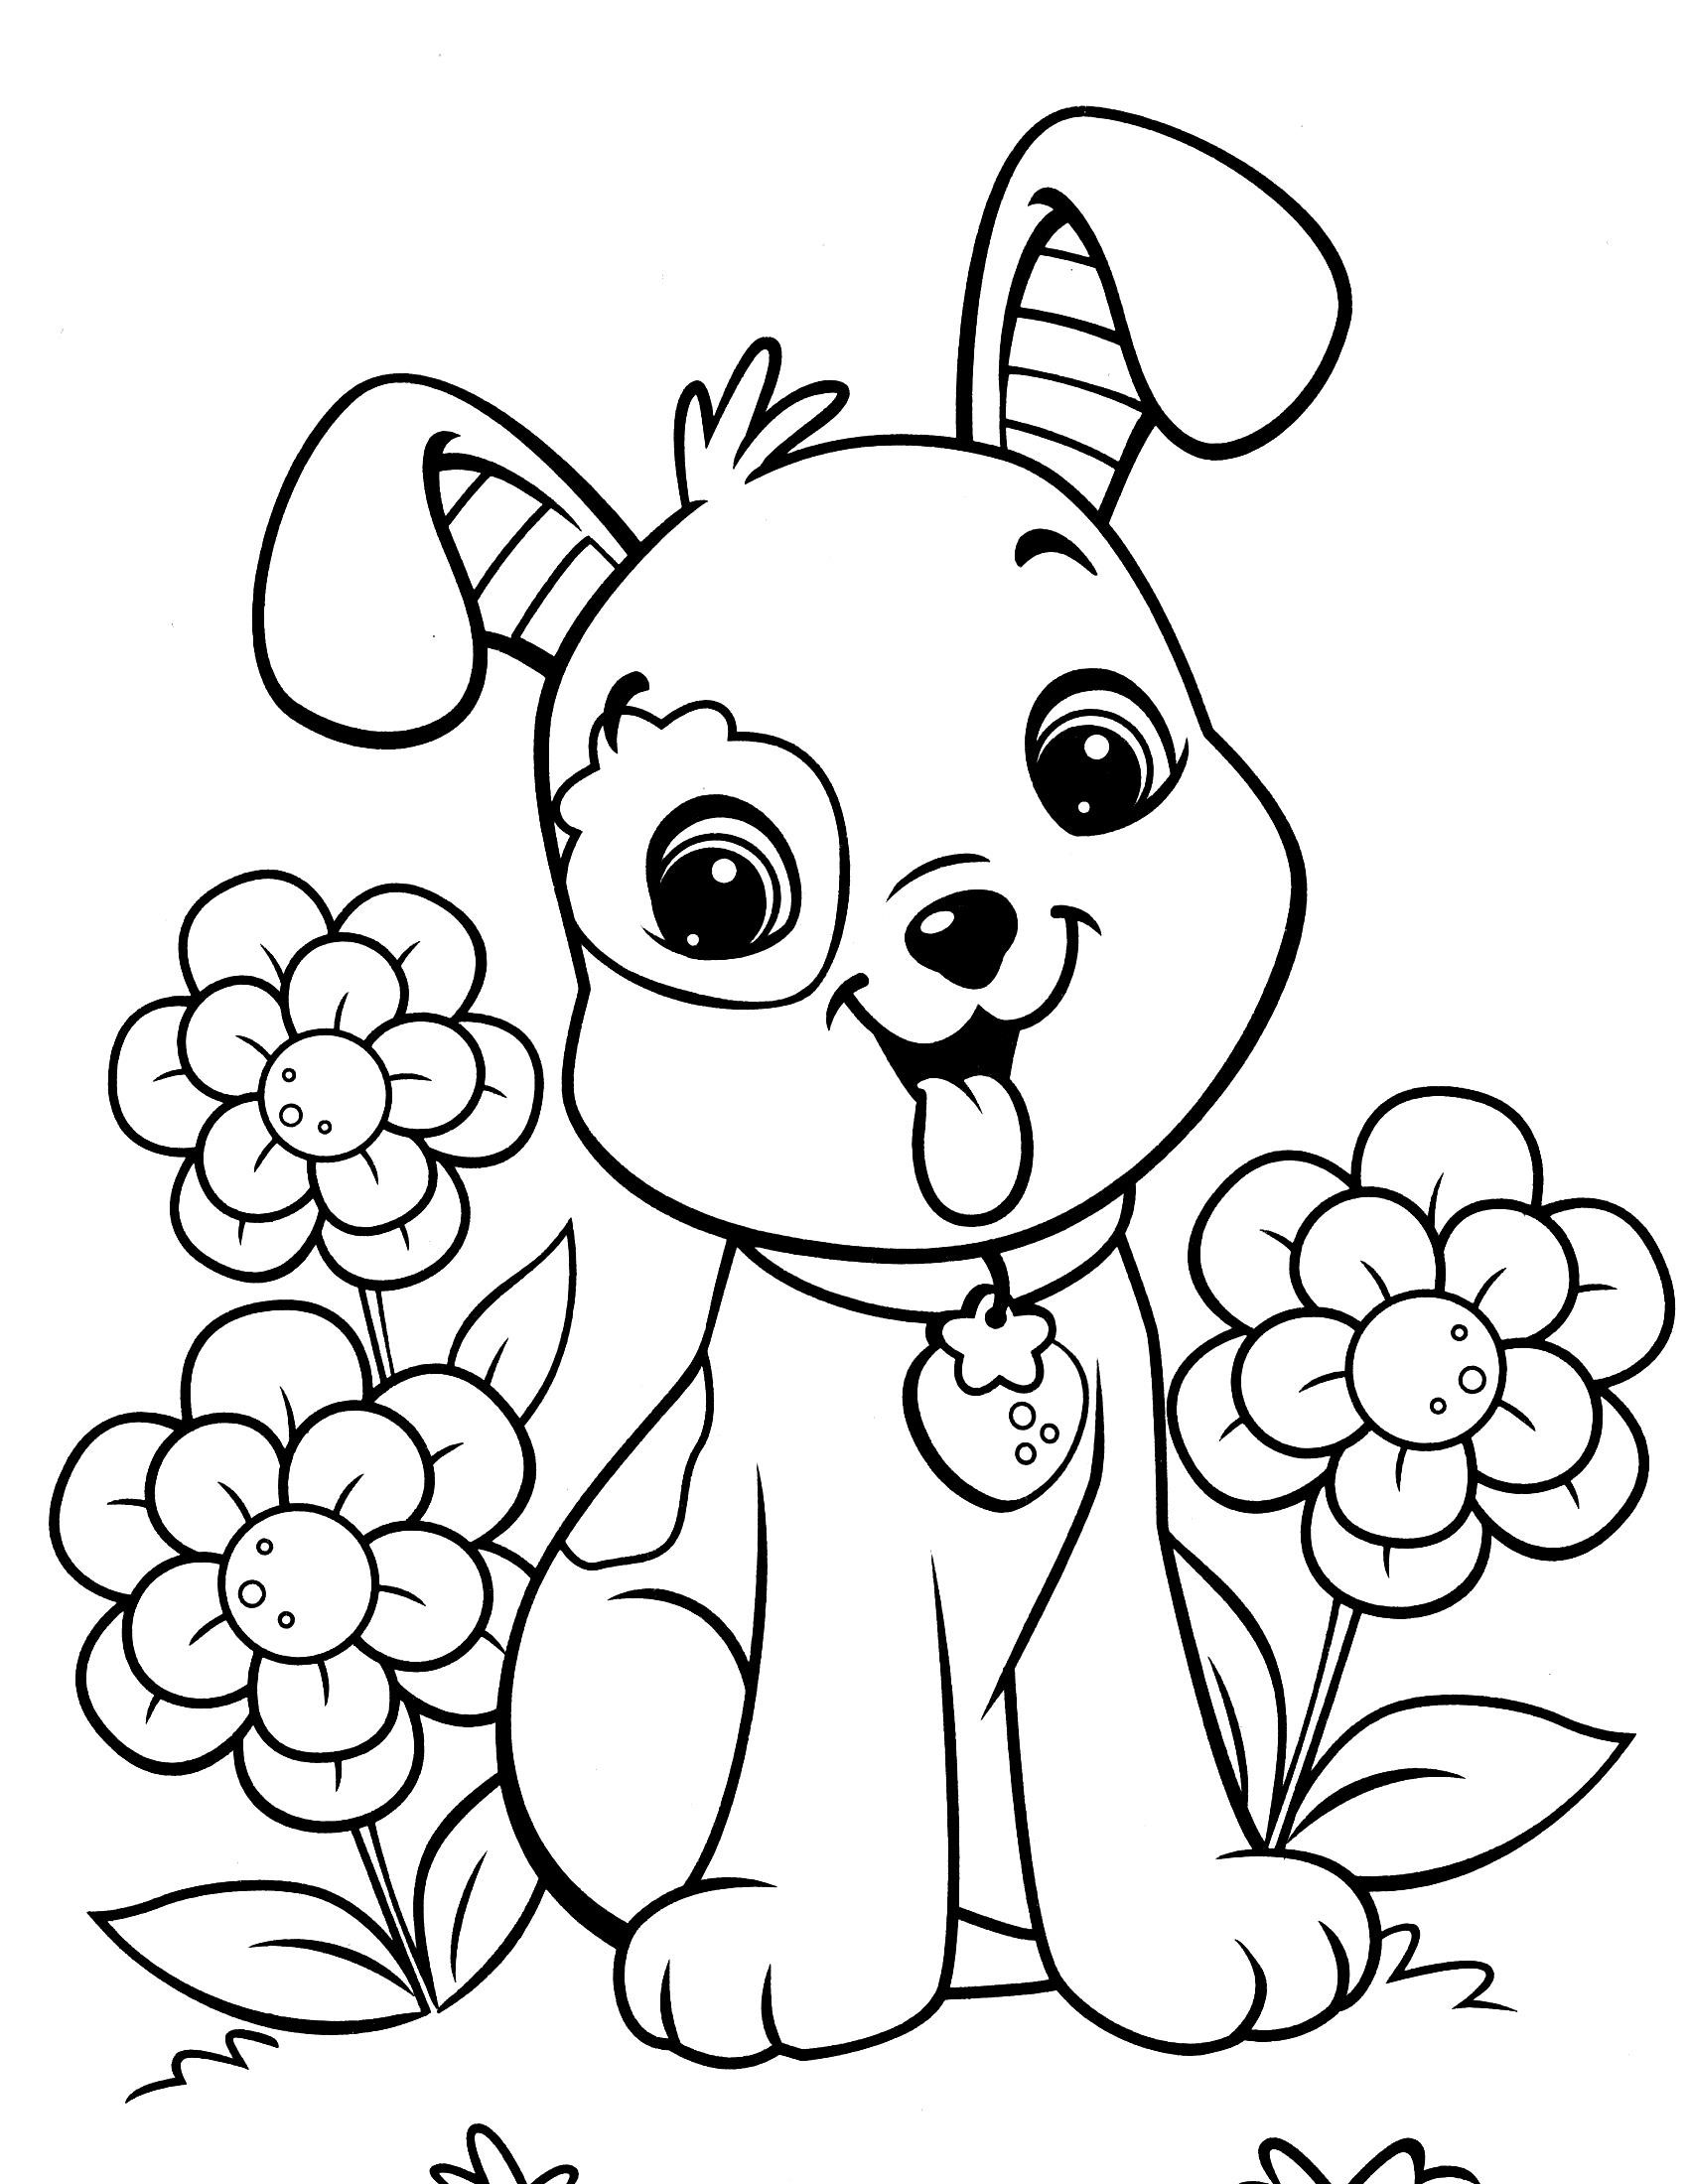 Cool-Puppy-Dog-Coloring-Pages-24